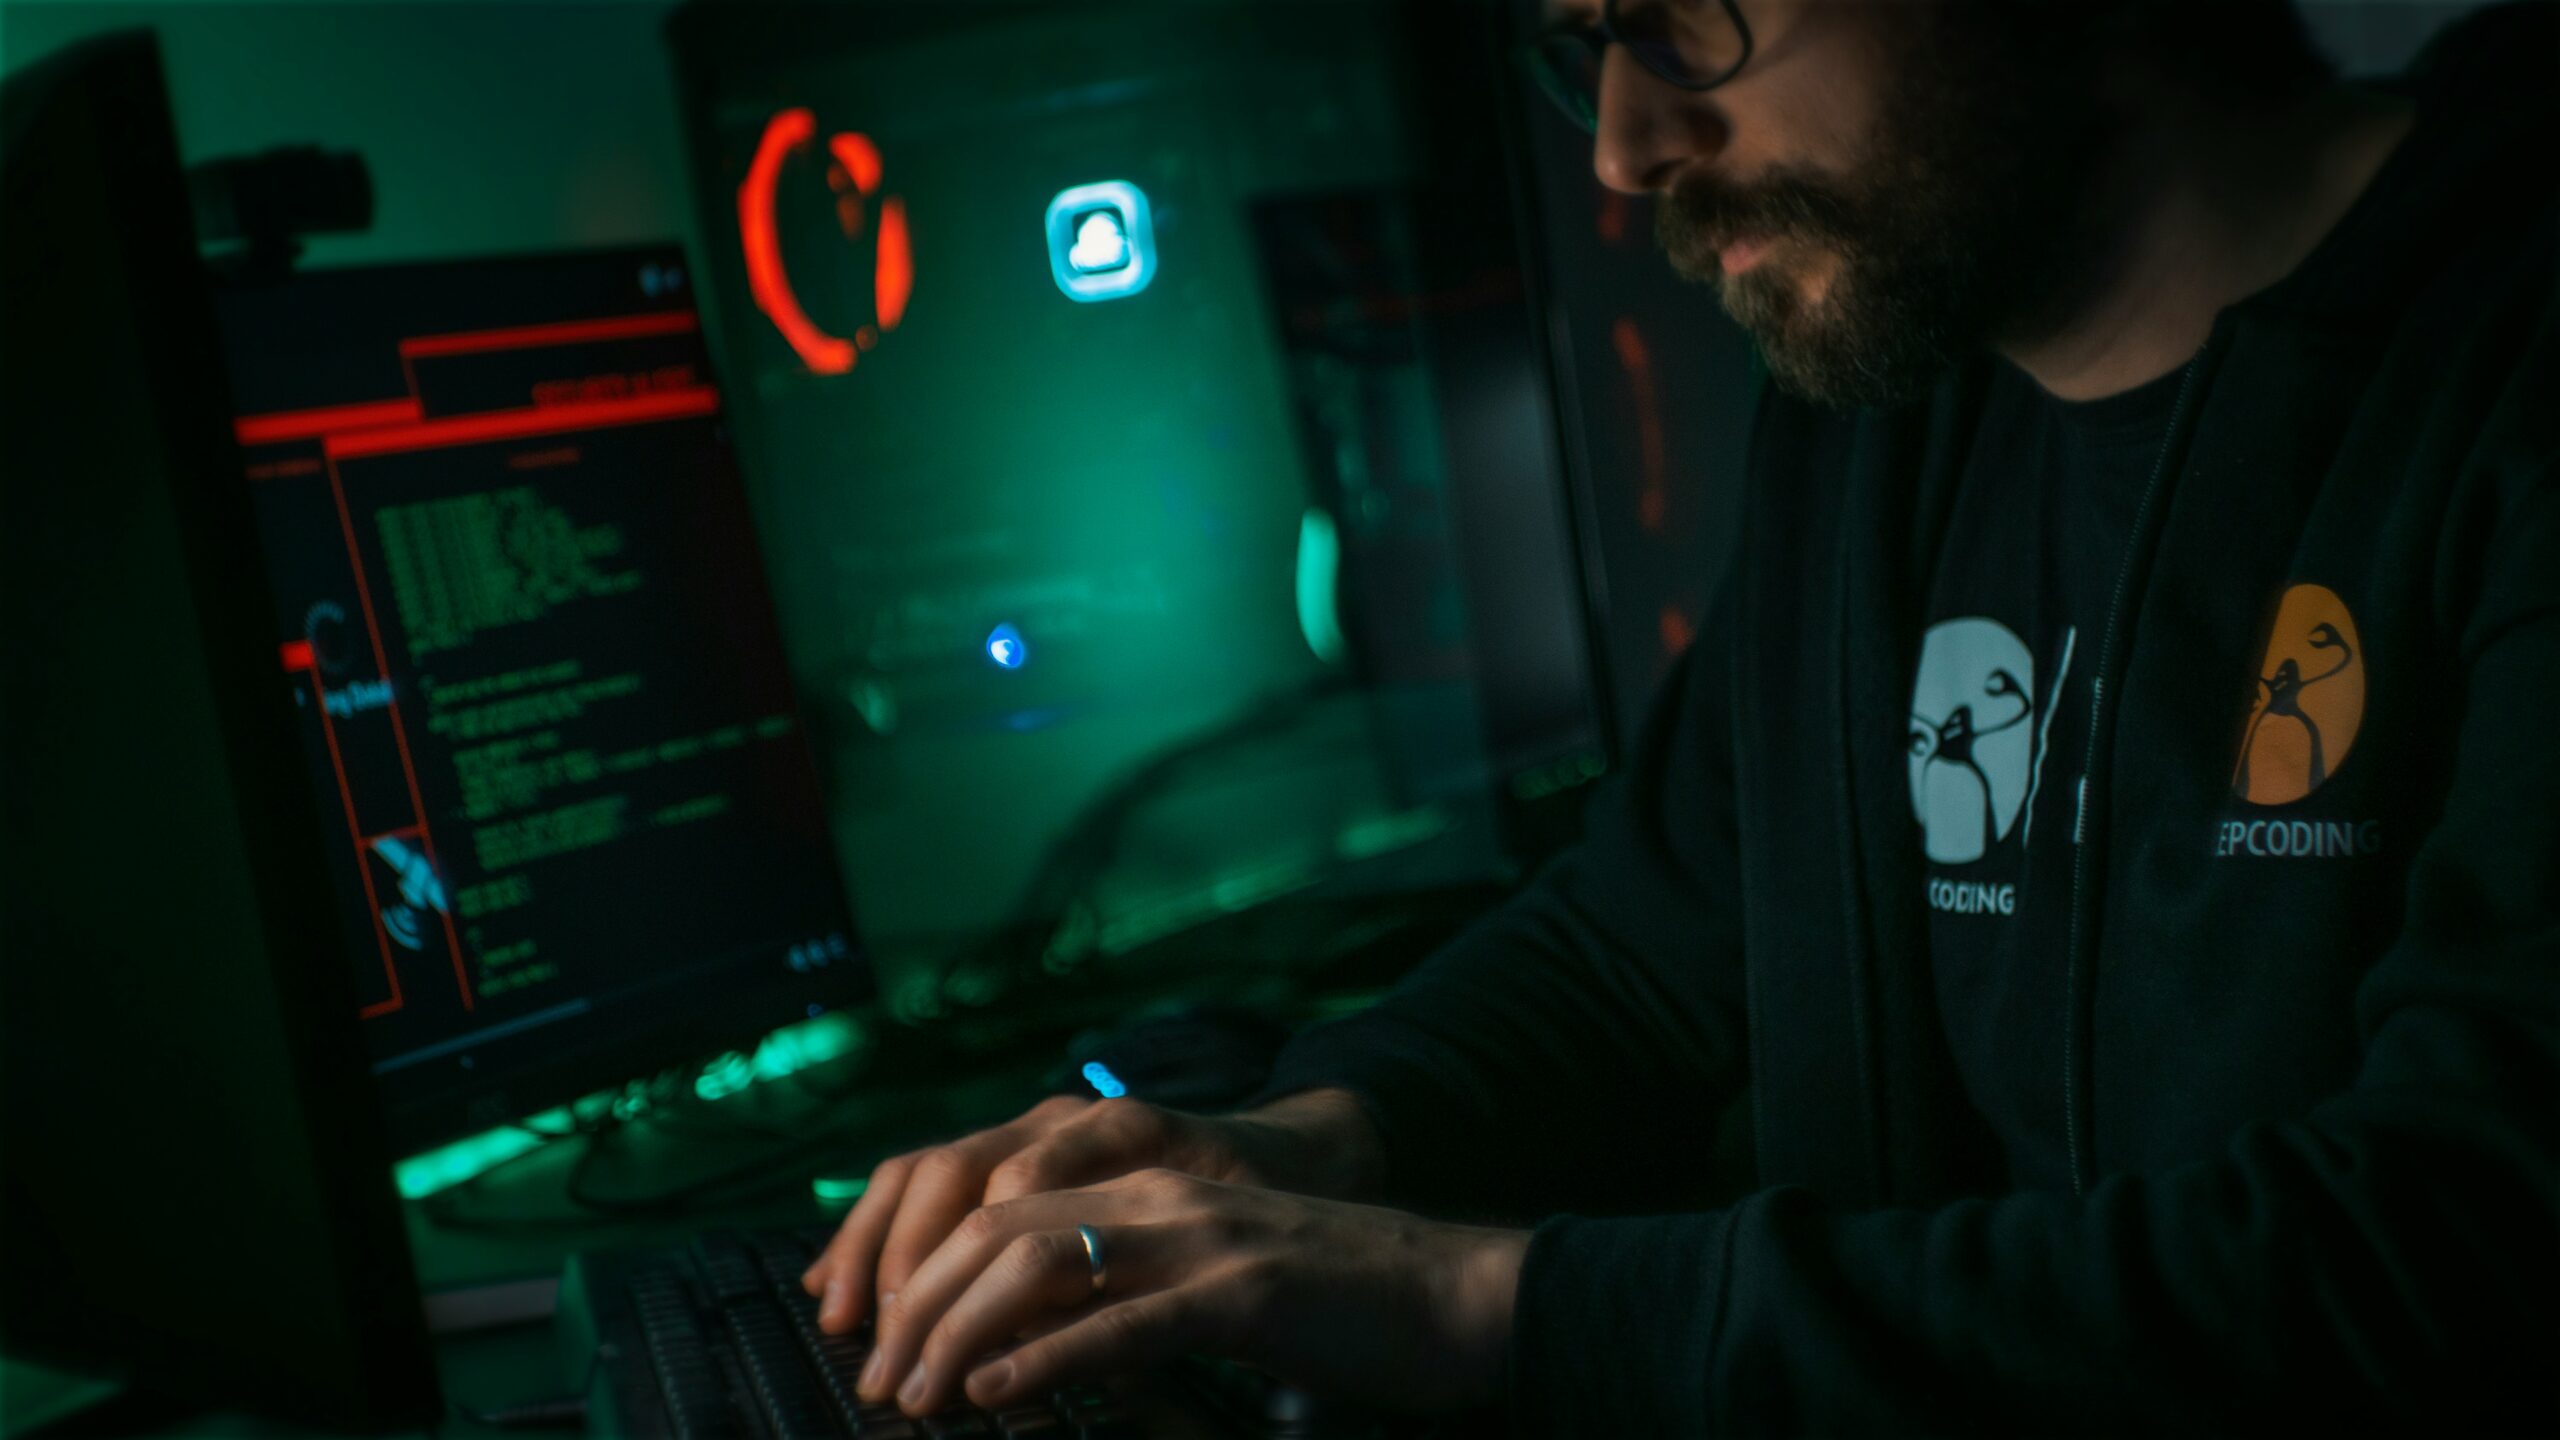 A man with a beard coding on a computer in a dimly lit room with green lighting, providing MSP cyber security services.